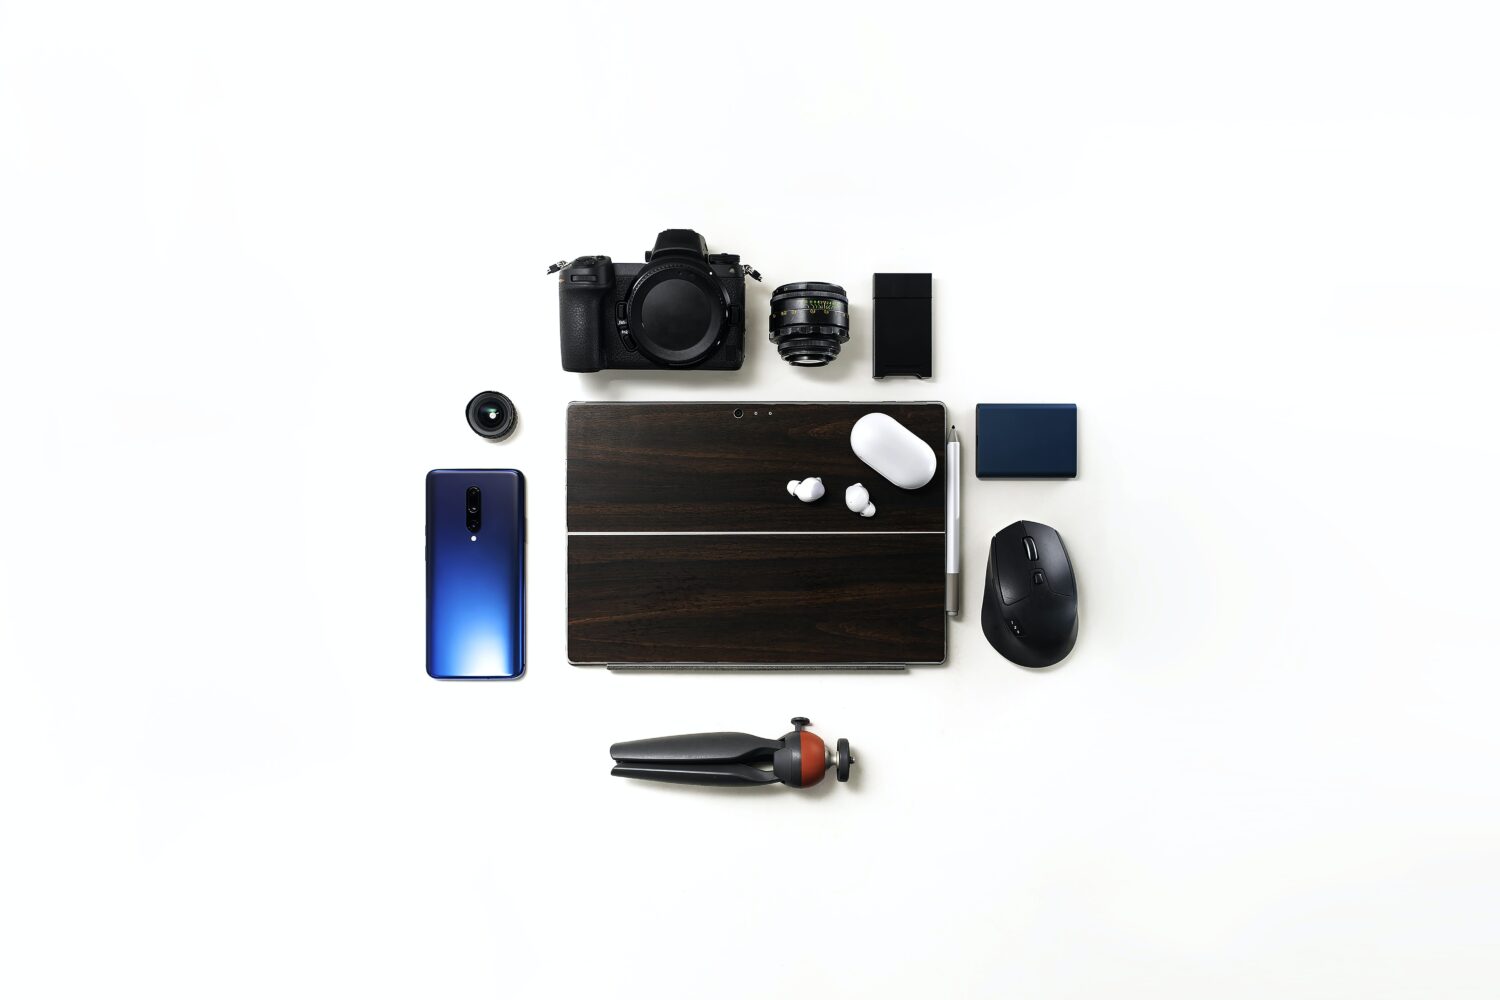 Smart phone, laptop, camera, lens, computer mouse and earbuds on white background